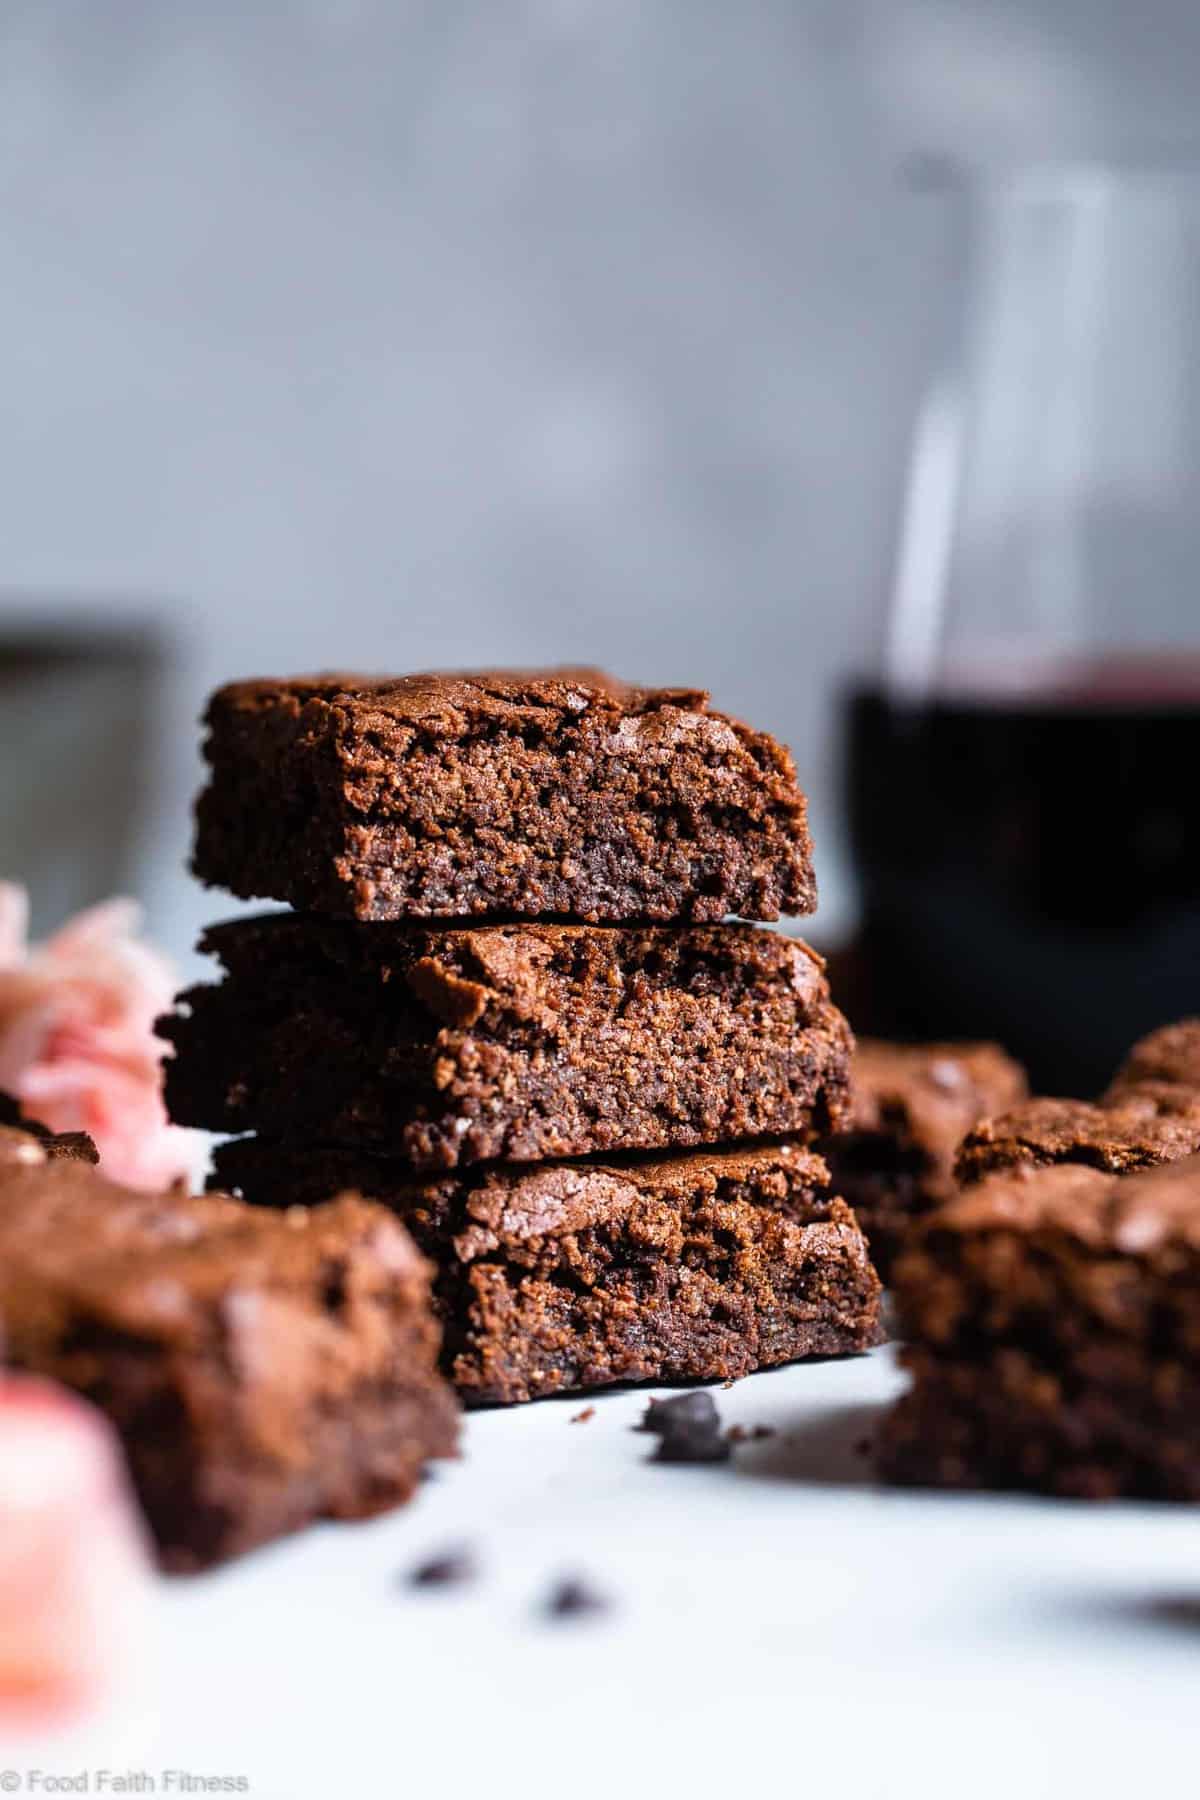 Easy Gluten Free Dairy Free Brownies - These grain free, healthy brownies come together in less than an hour and are SO dense, chewy and FUDGY! Paleo friendly, gluten and dairy free and SO delicious! | #Foodfaithfitness | 